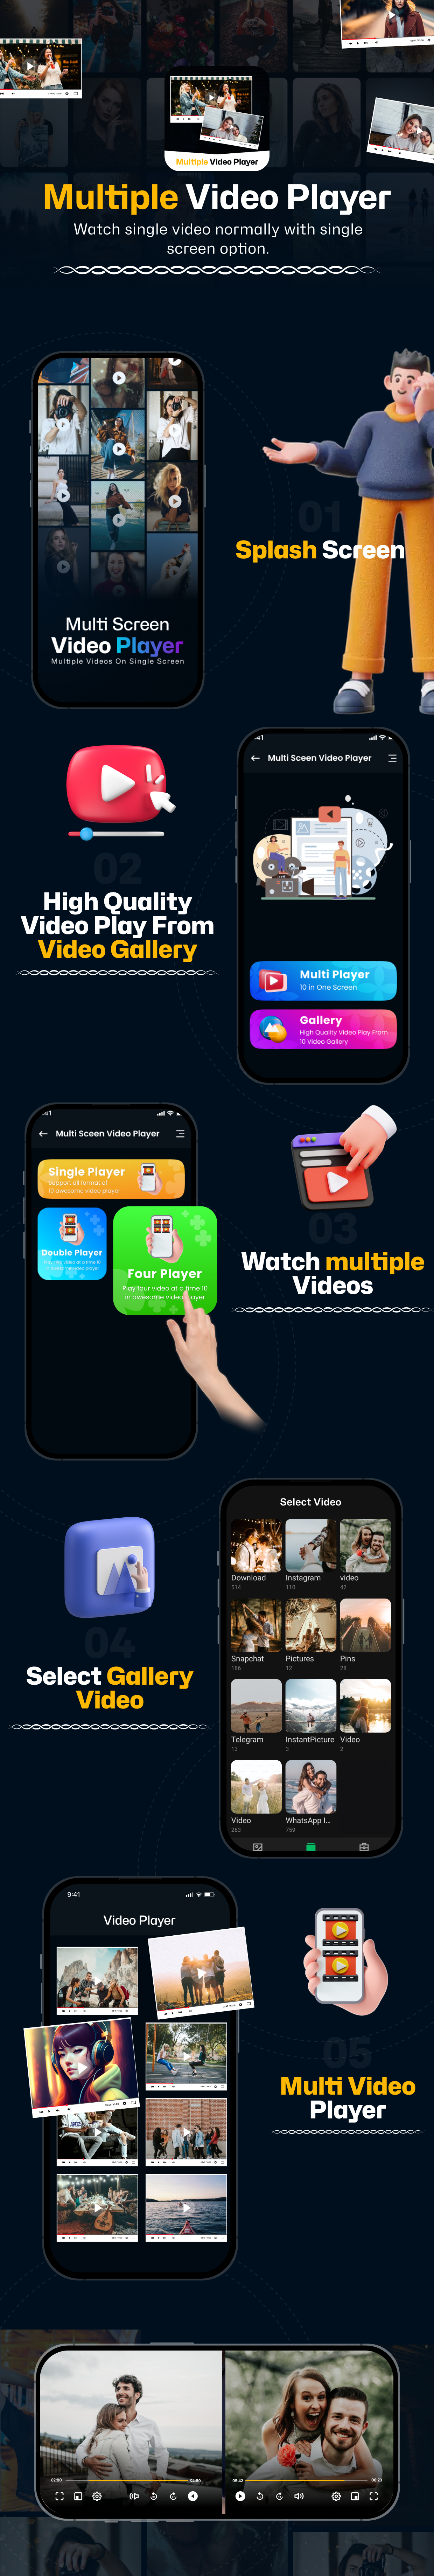 Multi Screen Video Player - Multi Screen View Player - Admob - Android App - 1